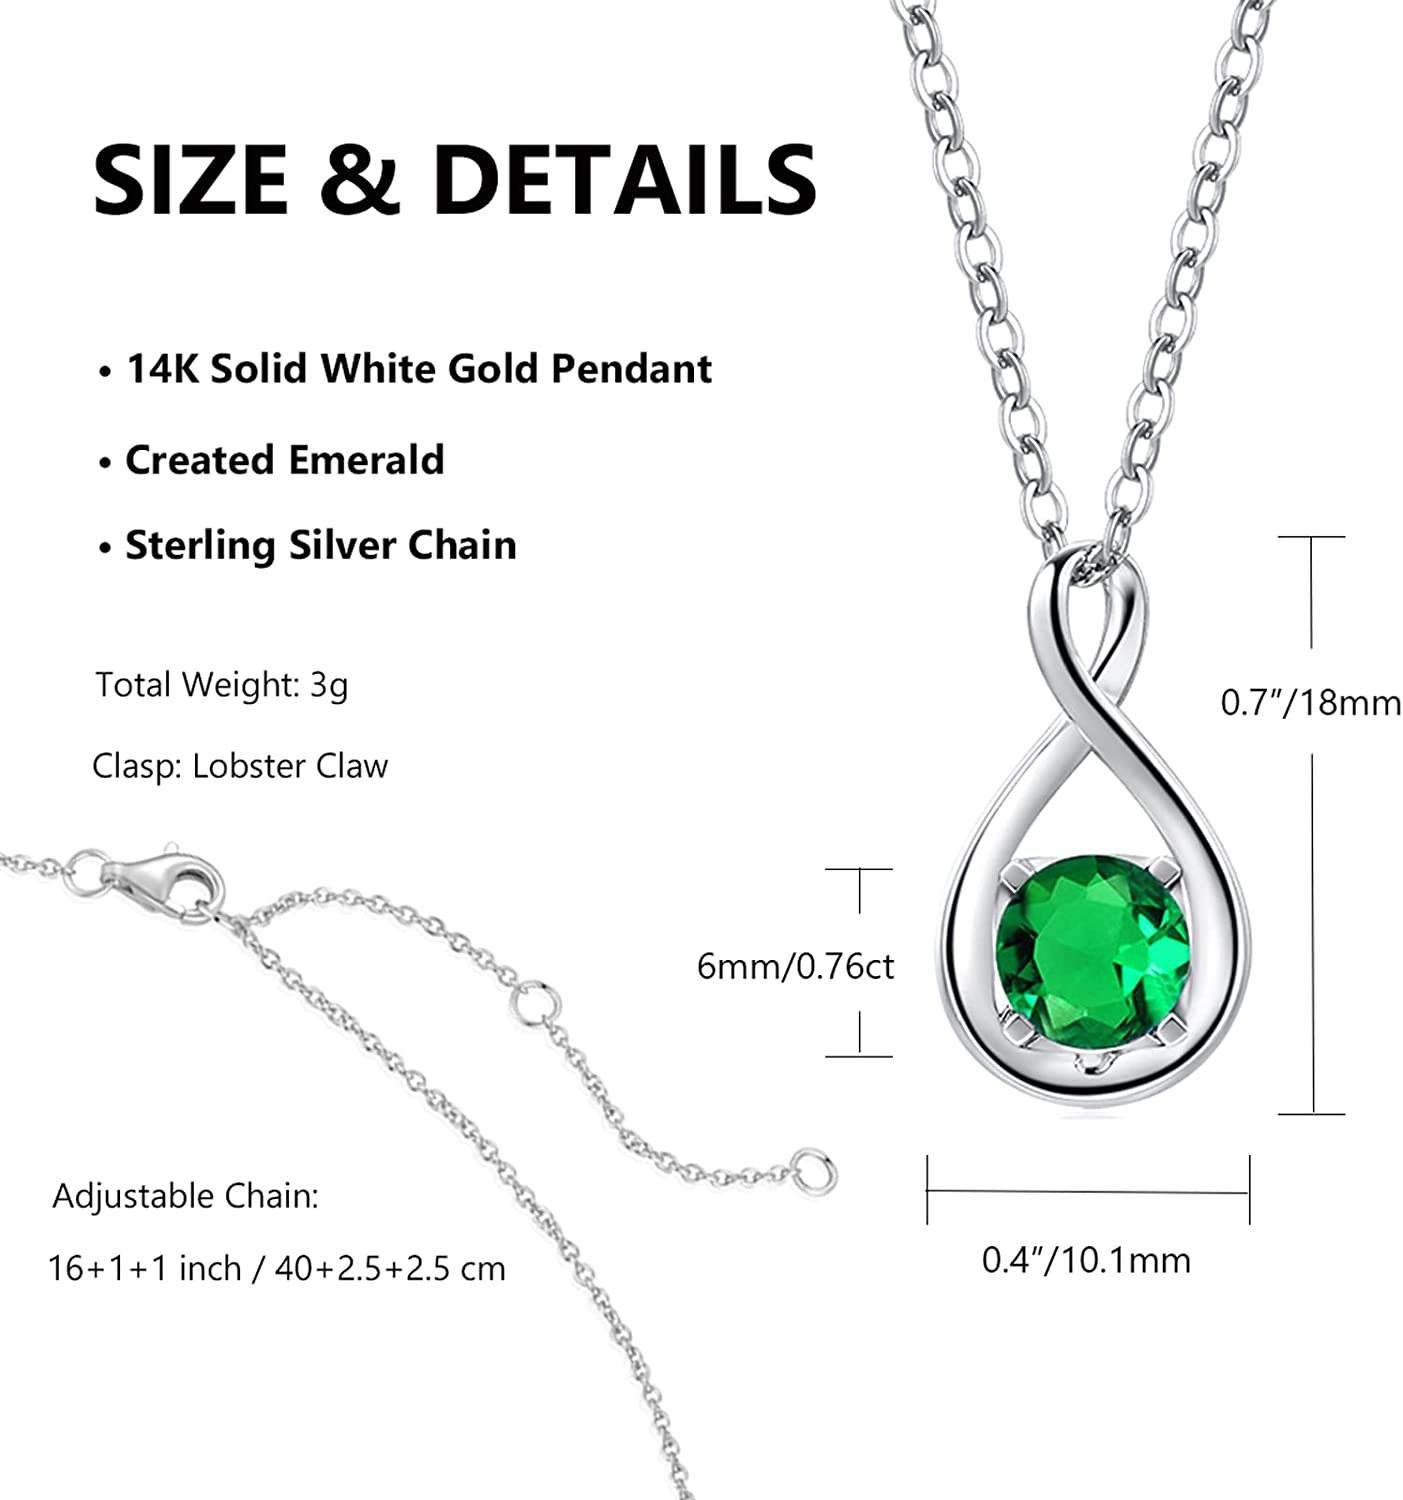 FANCIME "Birthstone" Emerald May Gemstone Sterling Silver Necklace Size